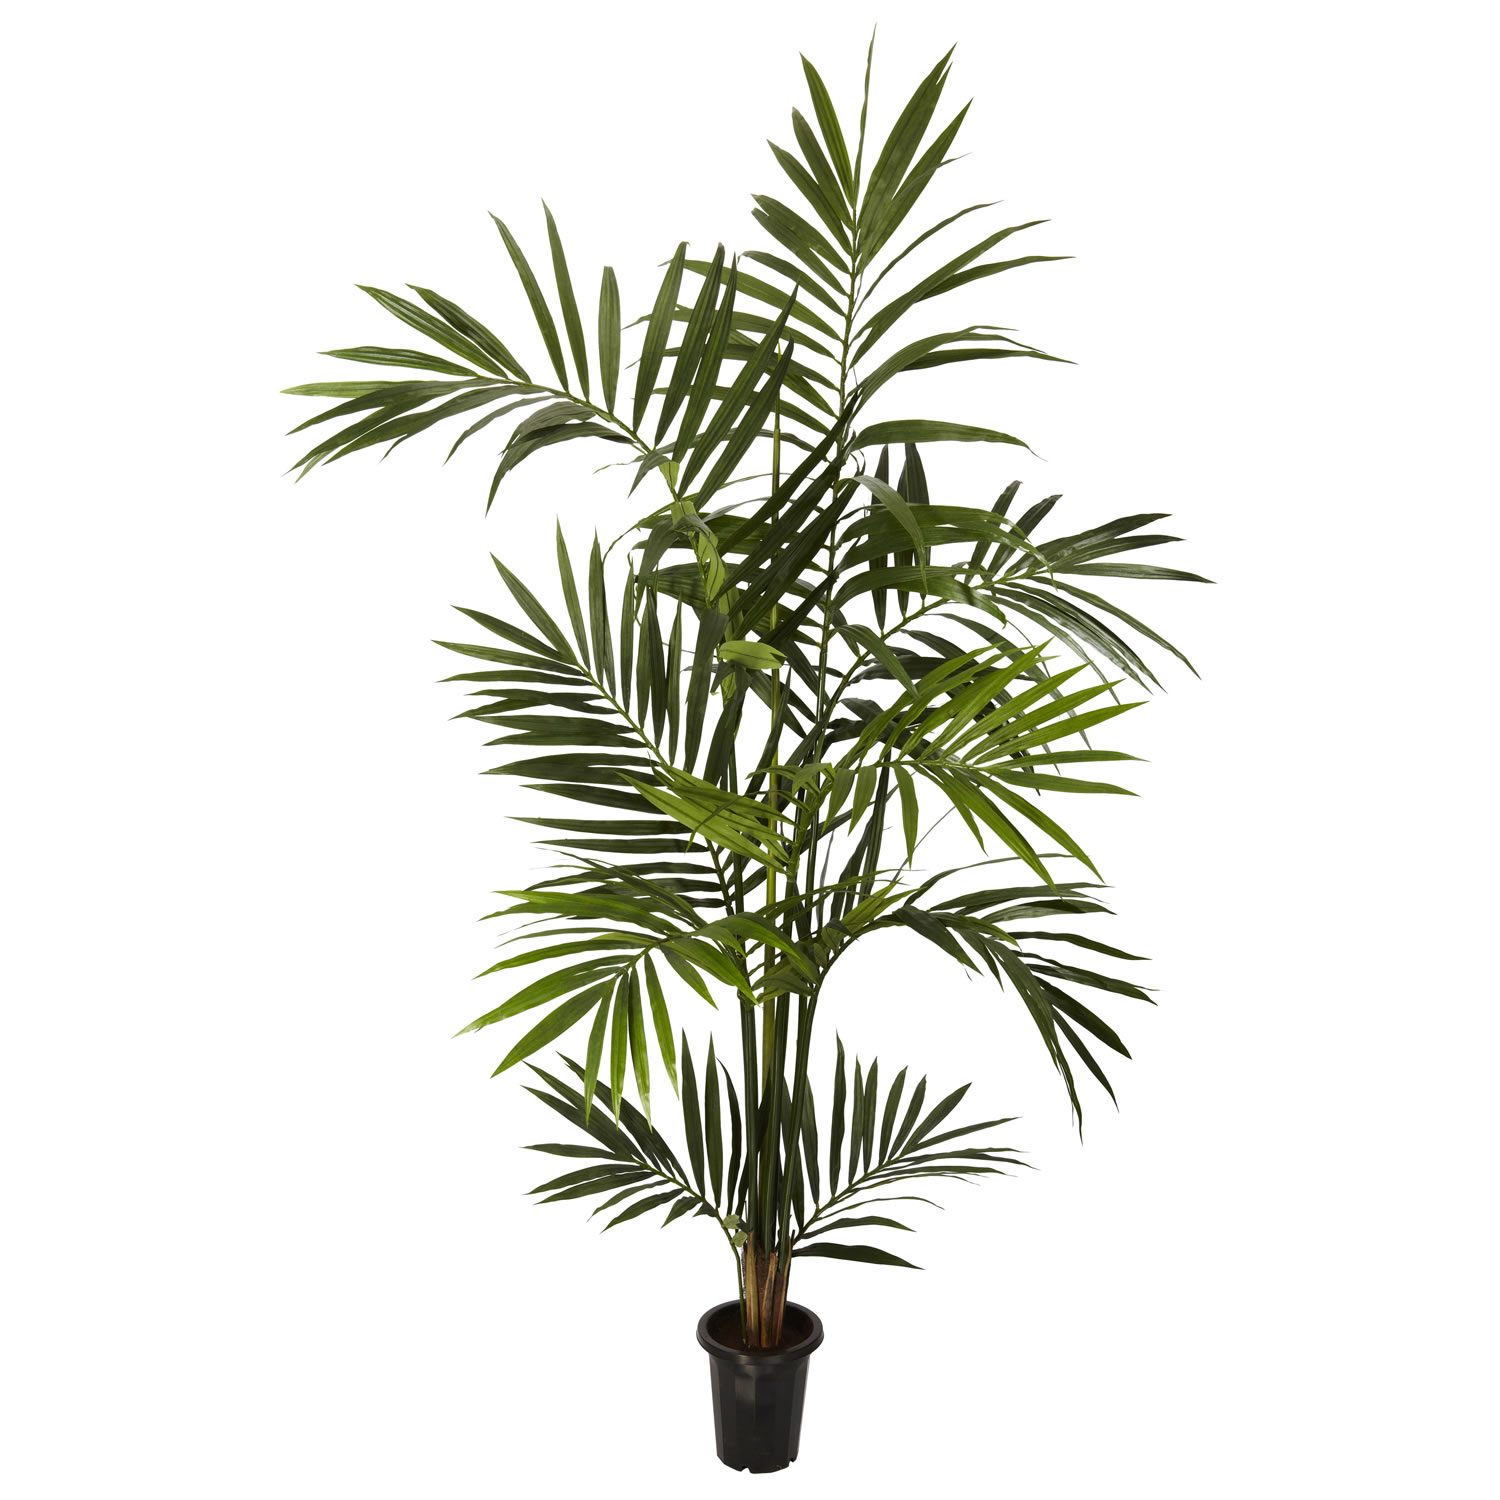 6 Foot Kentia Palm Tree: Potted